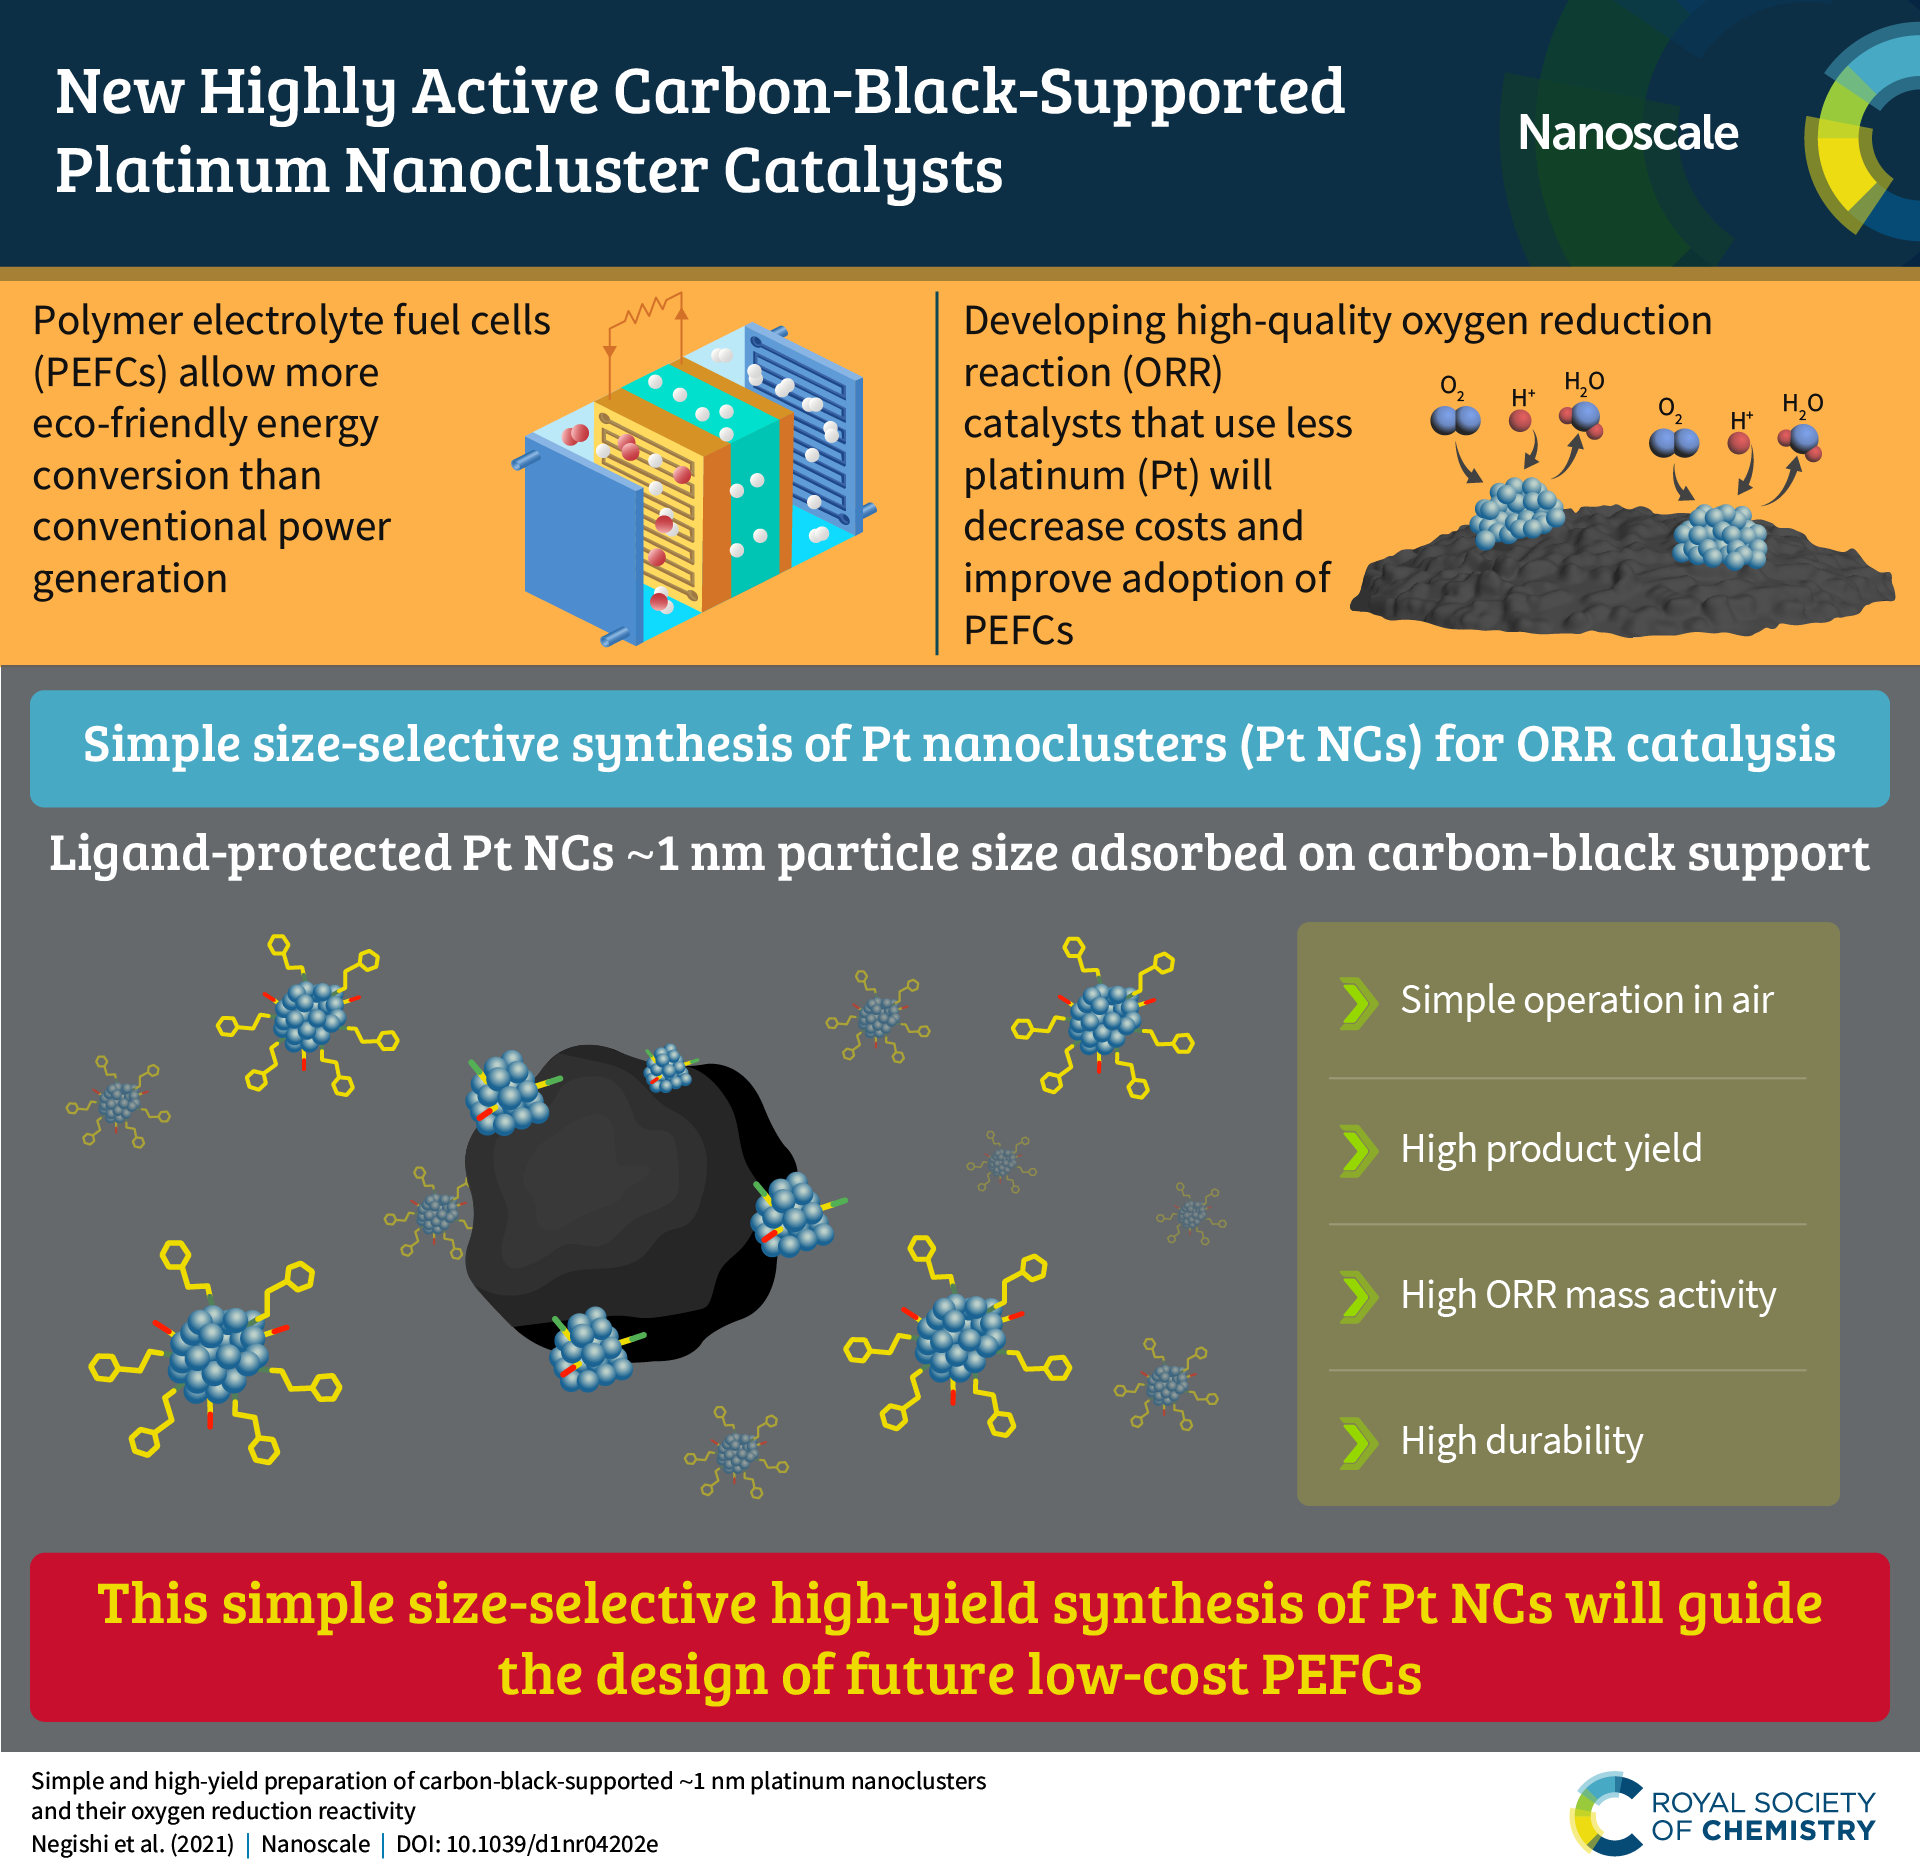 An infographic summarising the content of the article “Simple and high-yield preparation of carbon-black-supported ∼1 nm platinum nanoclusters and their oxygen reduction reactivity"